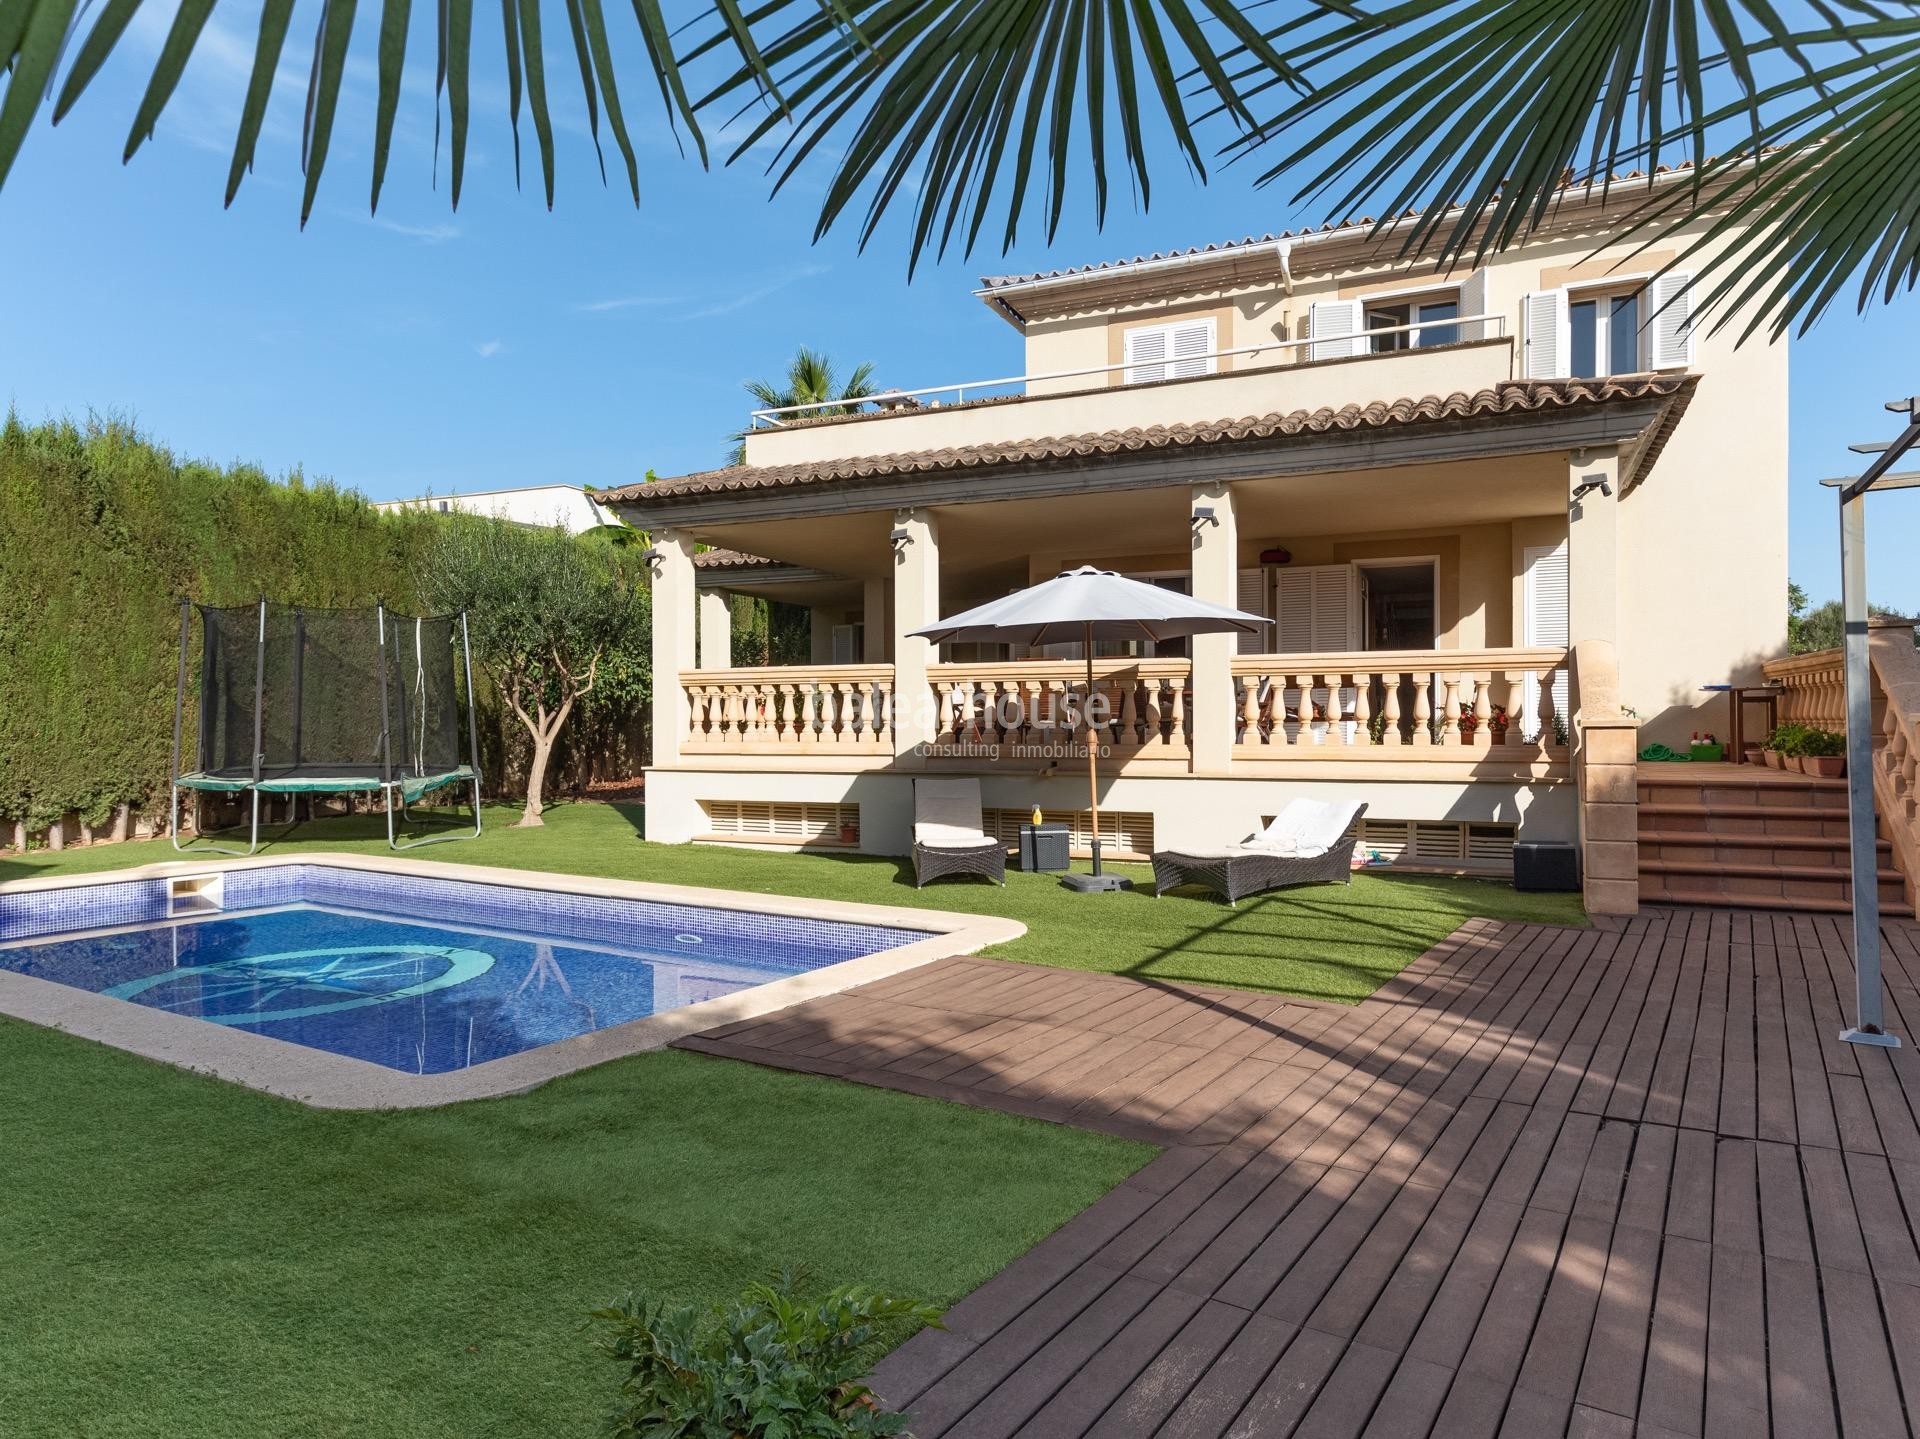 Excellent villa with sunny terraces and private pool situated in a green area close to Son Vida.